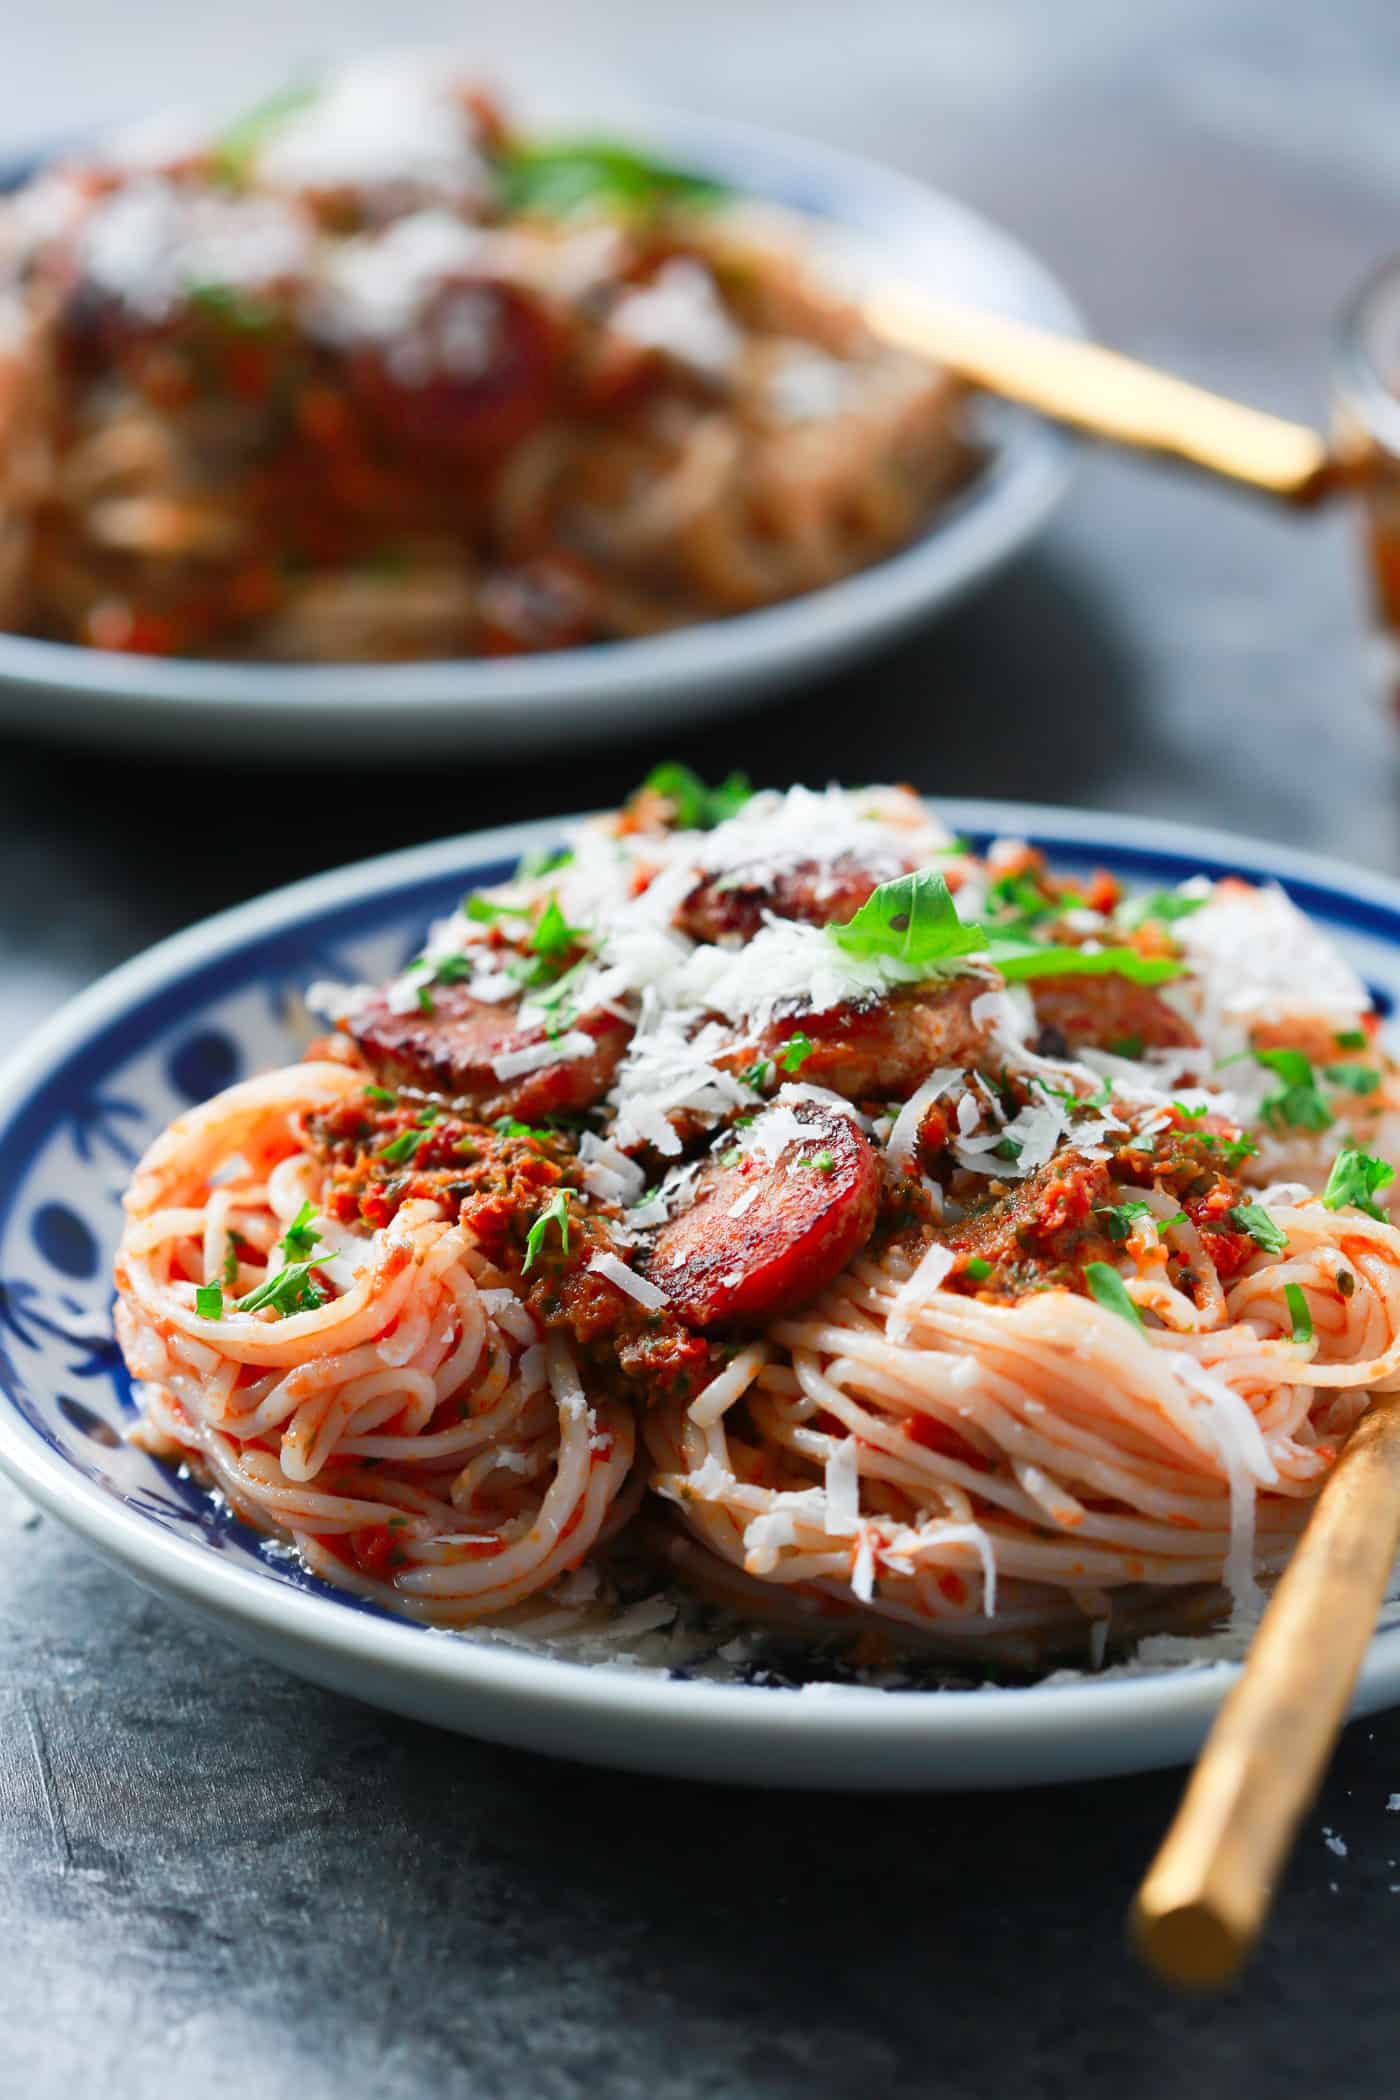 This Italian Sausage Sun-dried Tomato Pesto Pasta is loaded with flavour. And you won't believe this recipe is actually low-carb and gluten-free! 